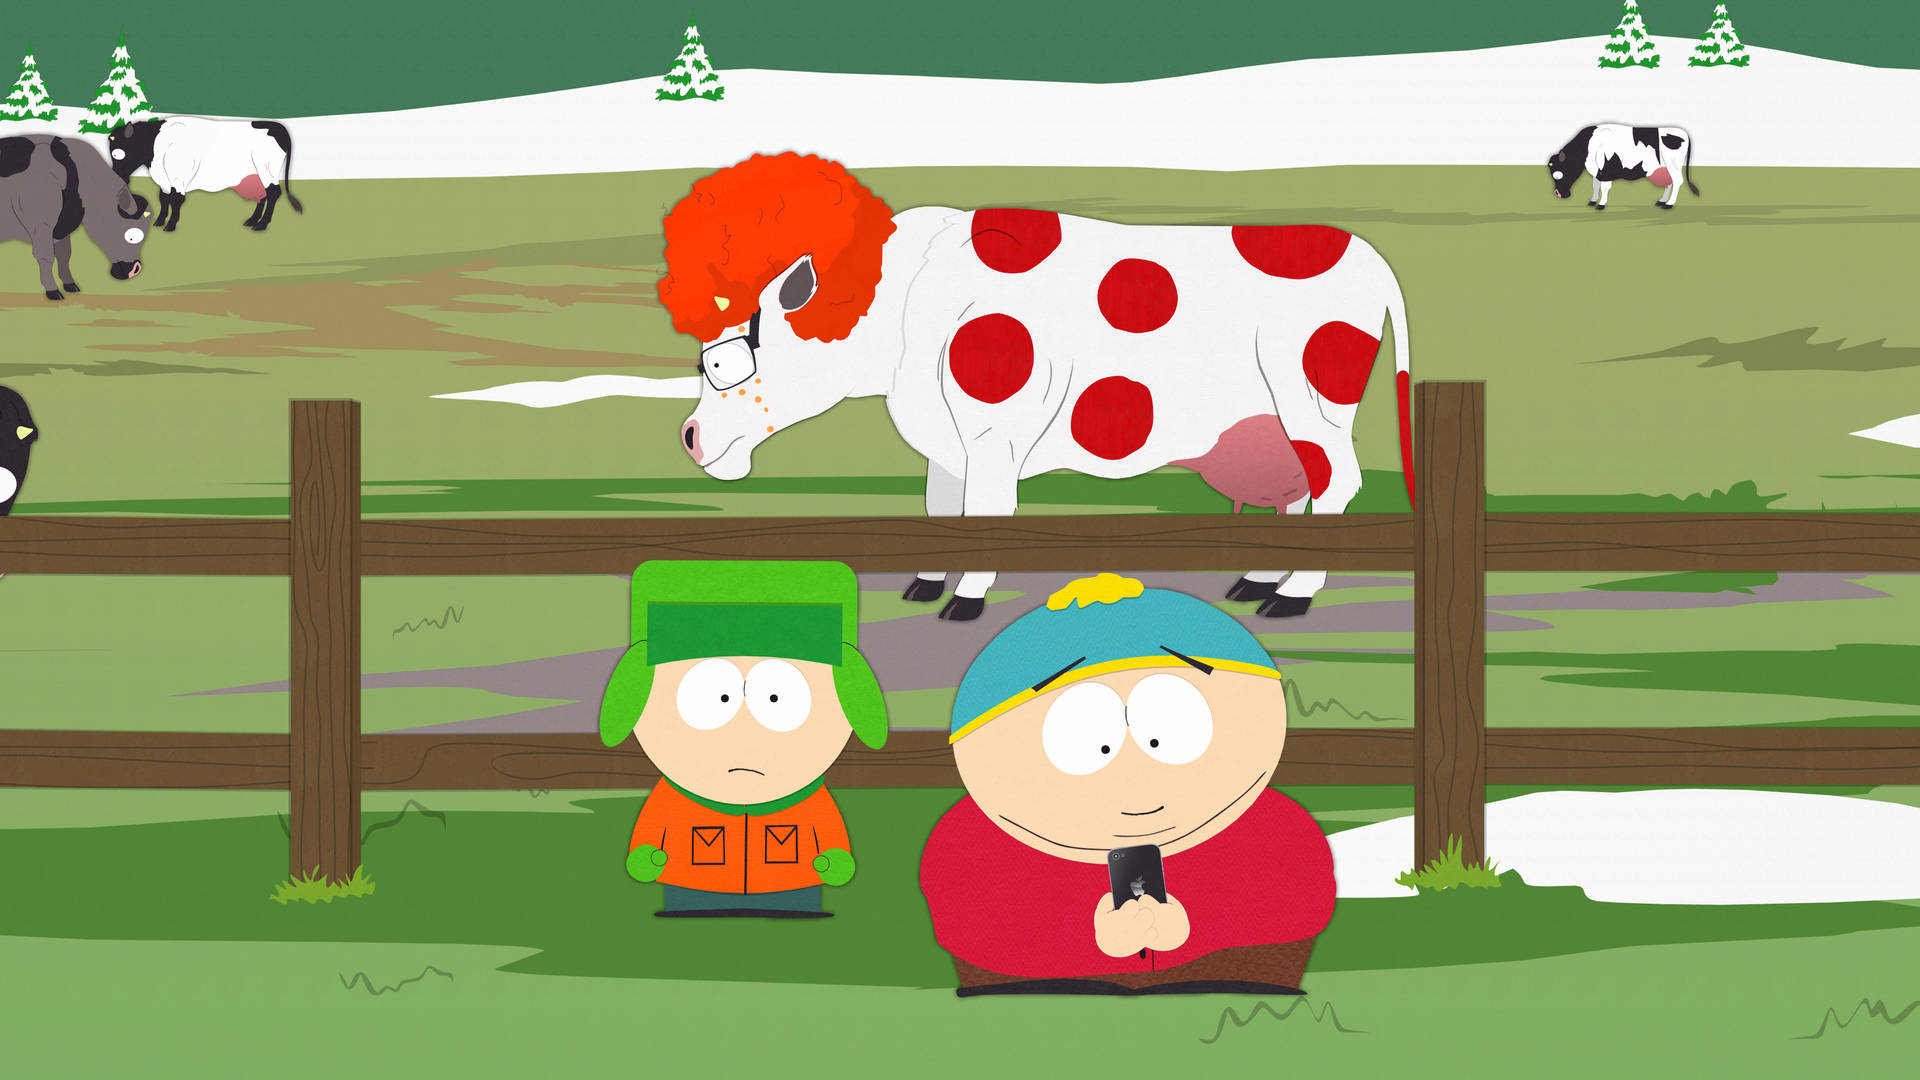 Eric Cartman - South Park Ginger Cow Episode Background